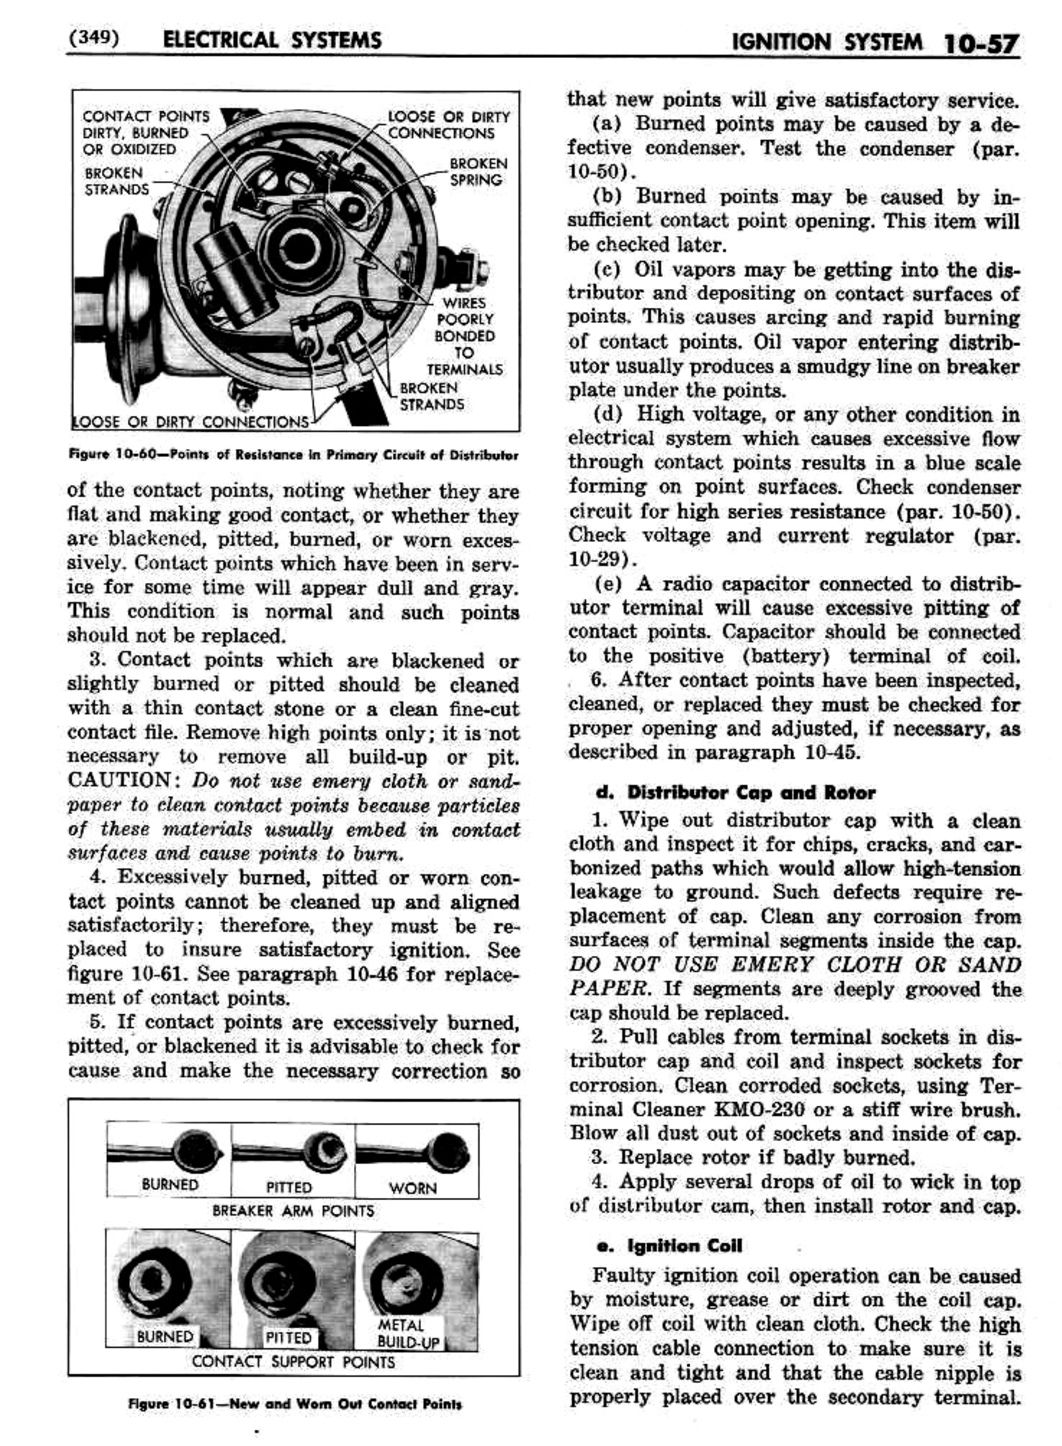 n_11 1951 Buick Shop Manual - Electrical Systems-057-057.jpg